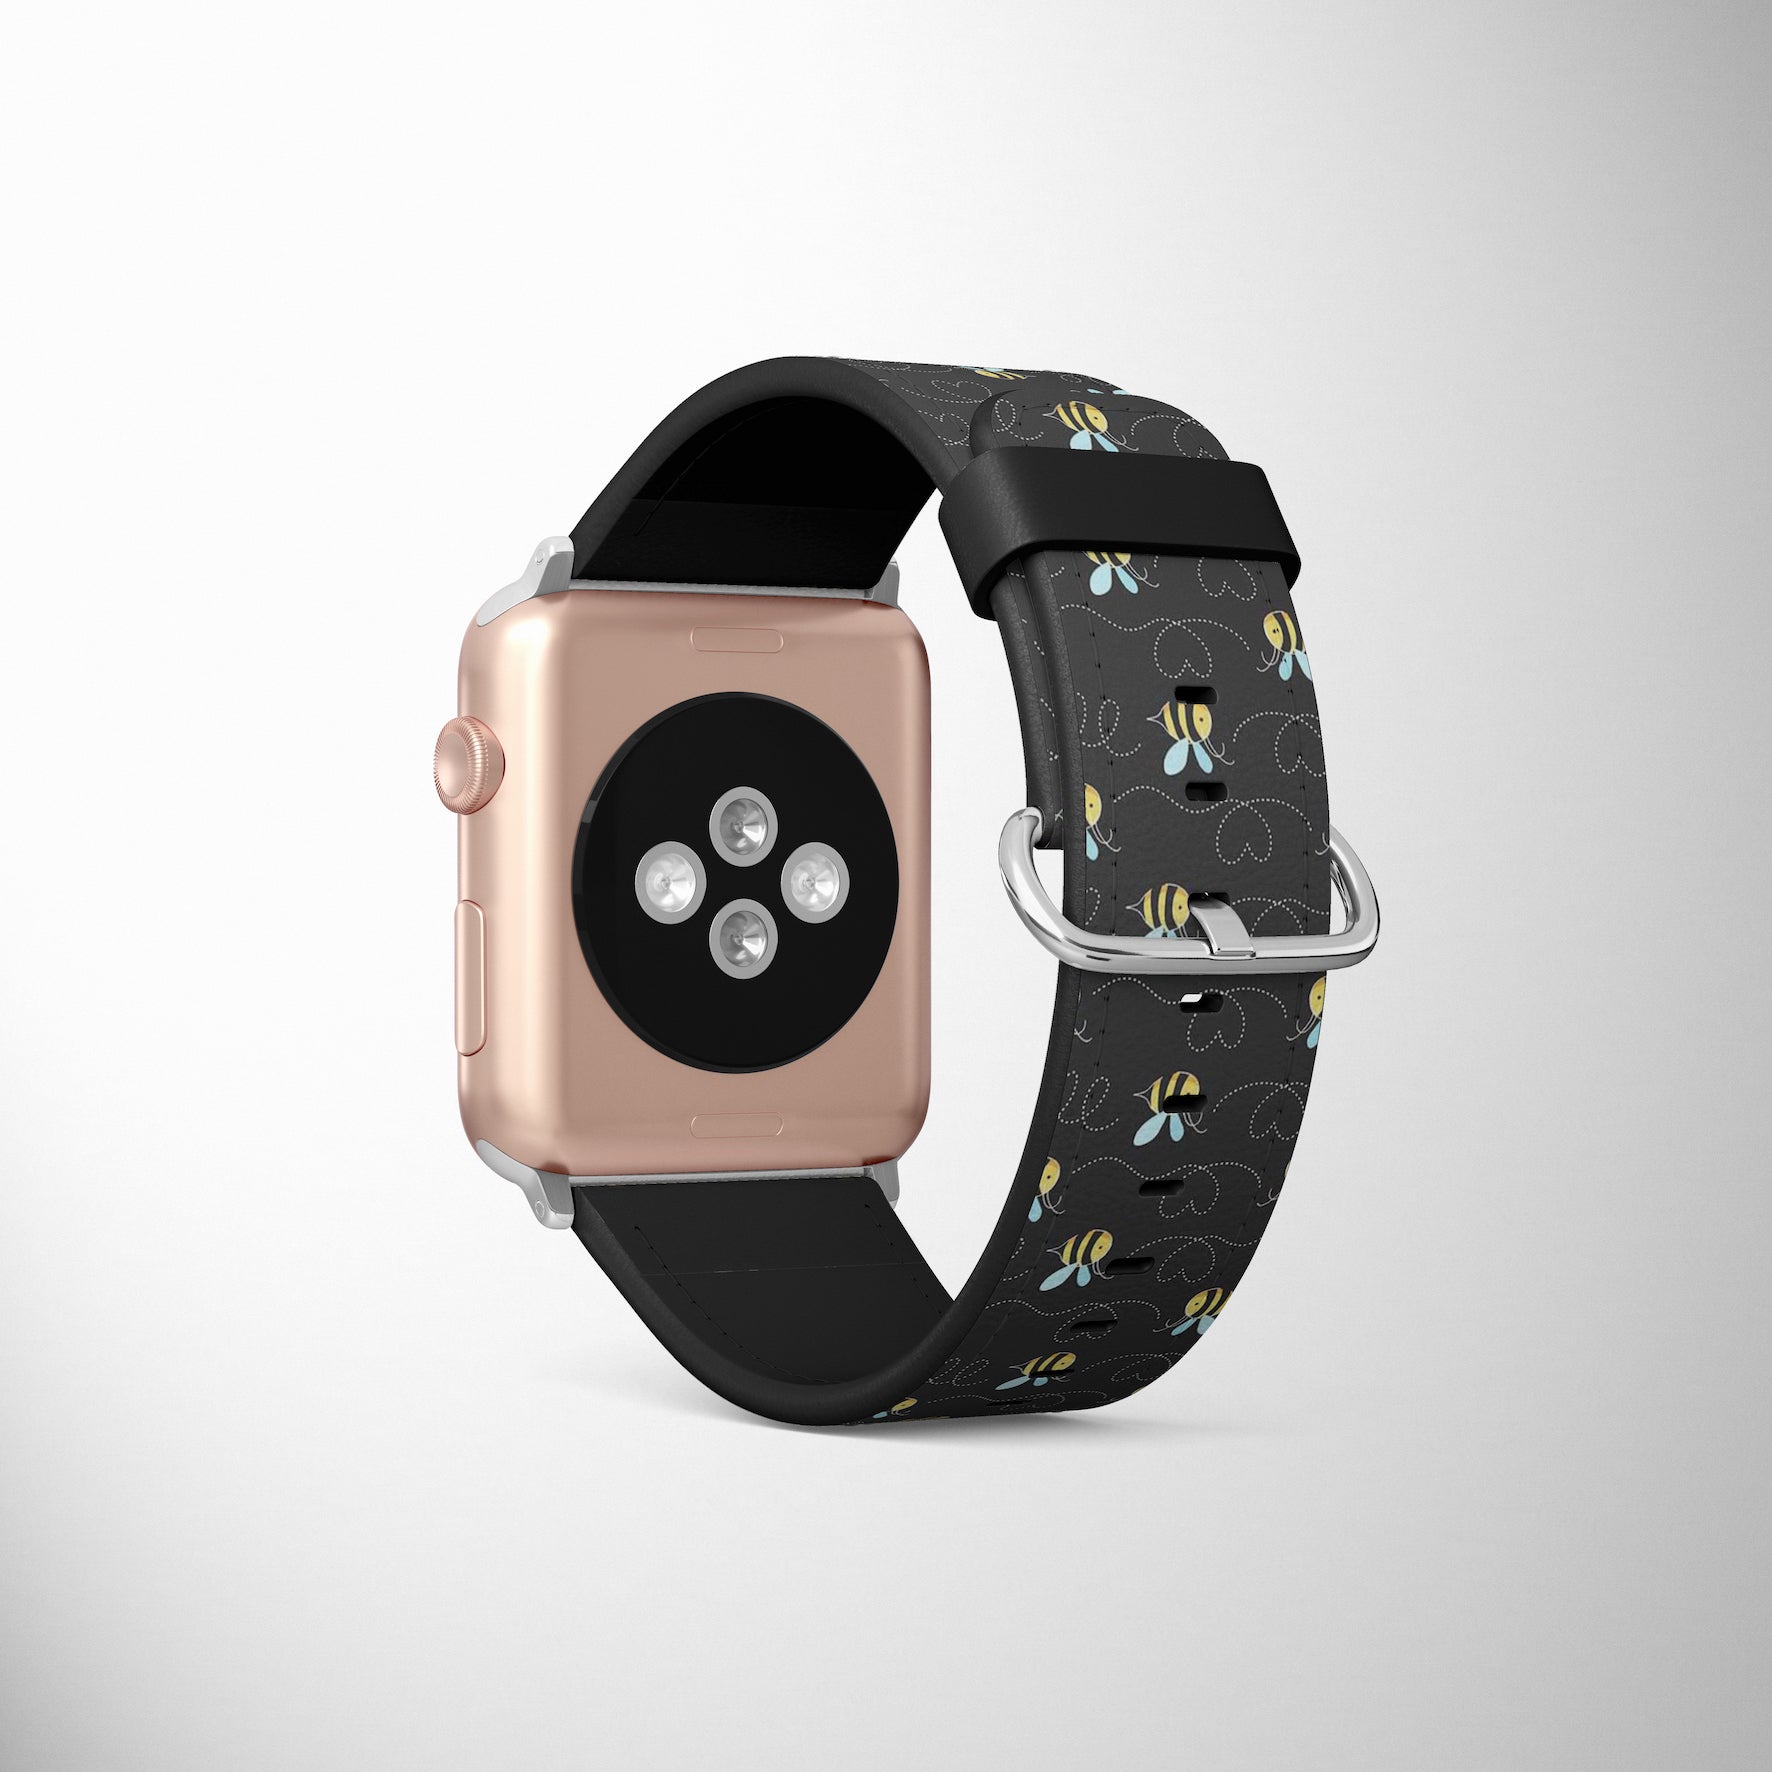 Bumble Bees & Hearts Faux Leather Apple Watch Band for Apple Watch 1,2,3,4,5,6,SE - www.scottsy.com